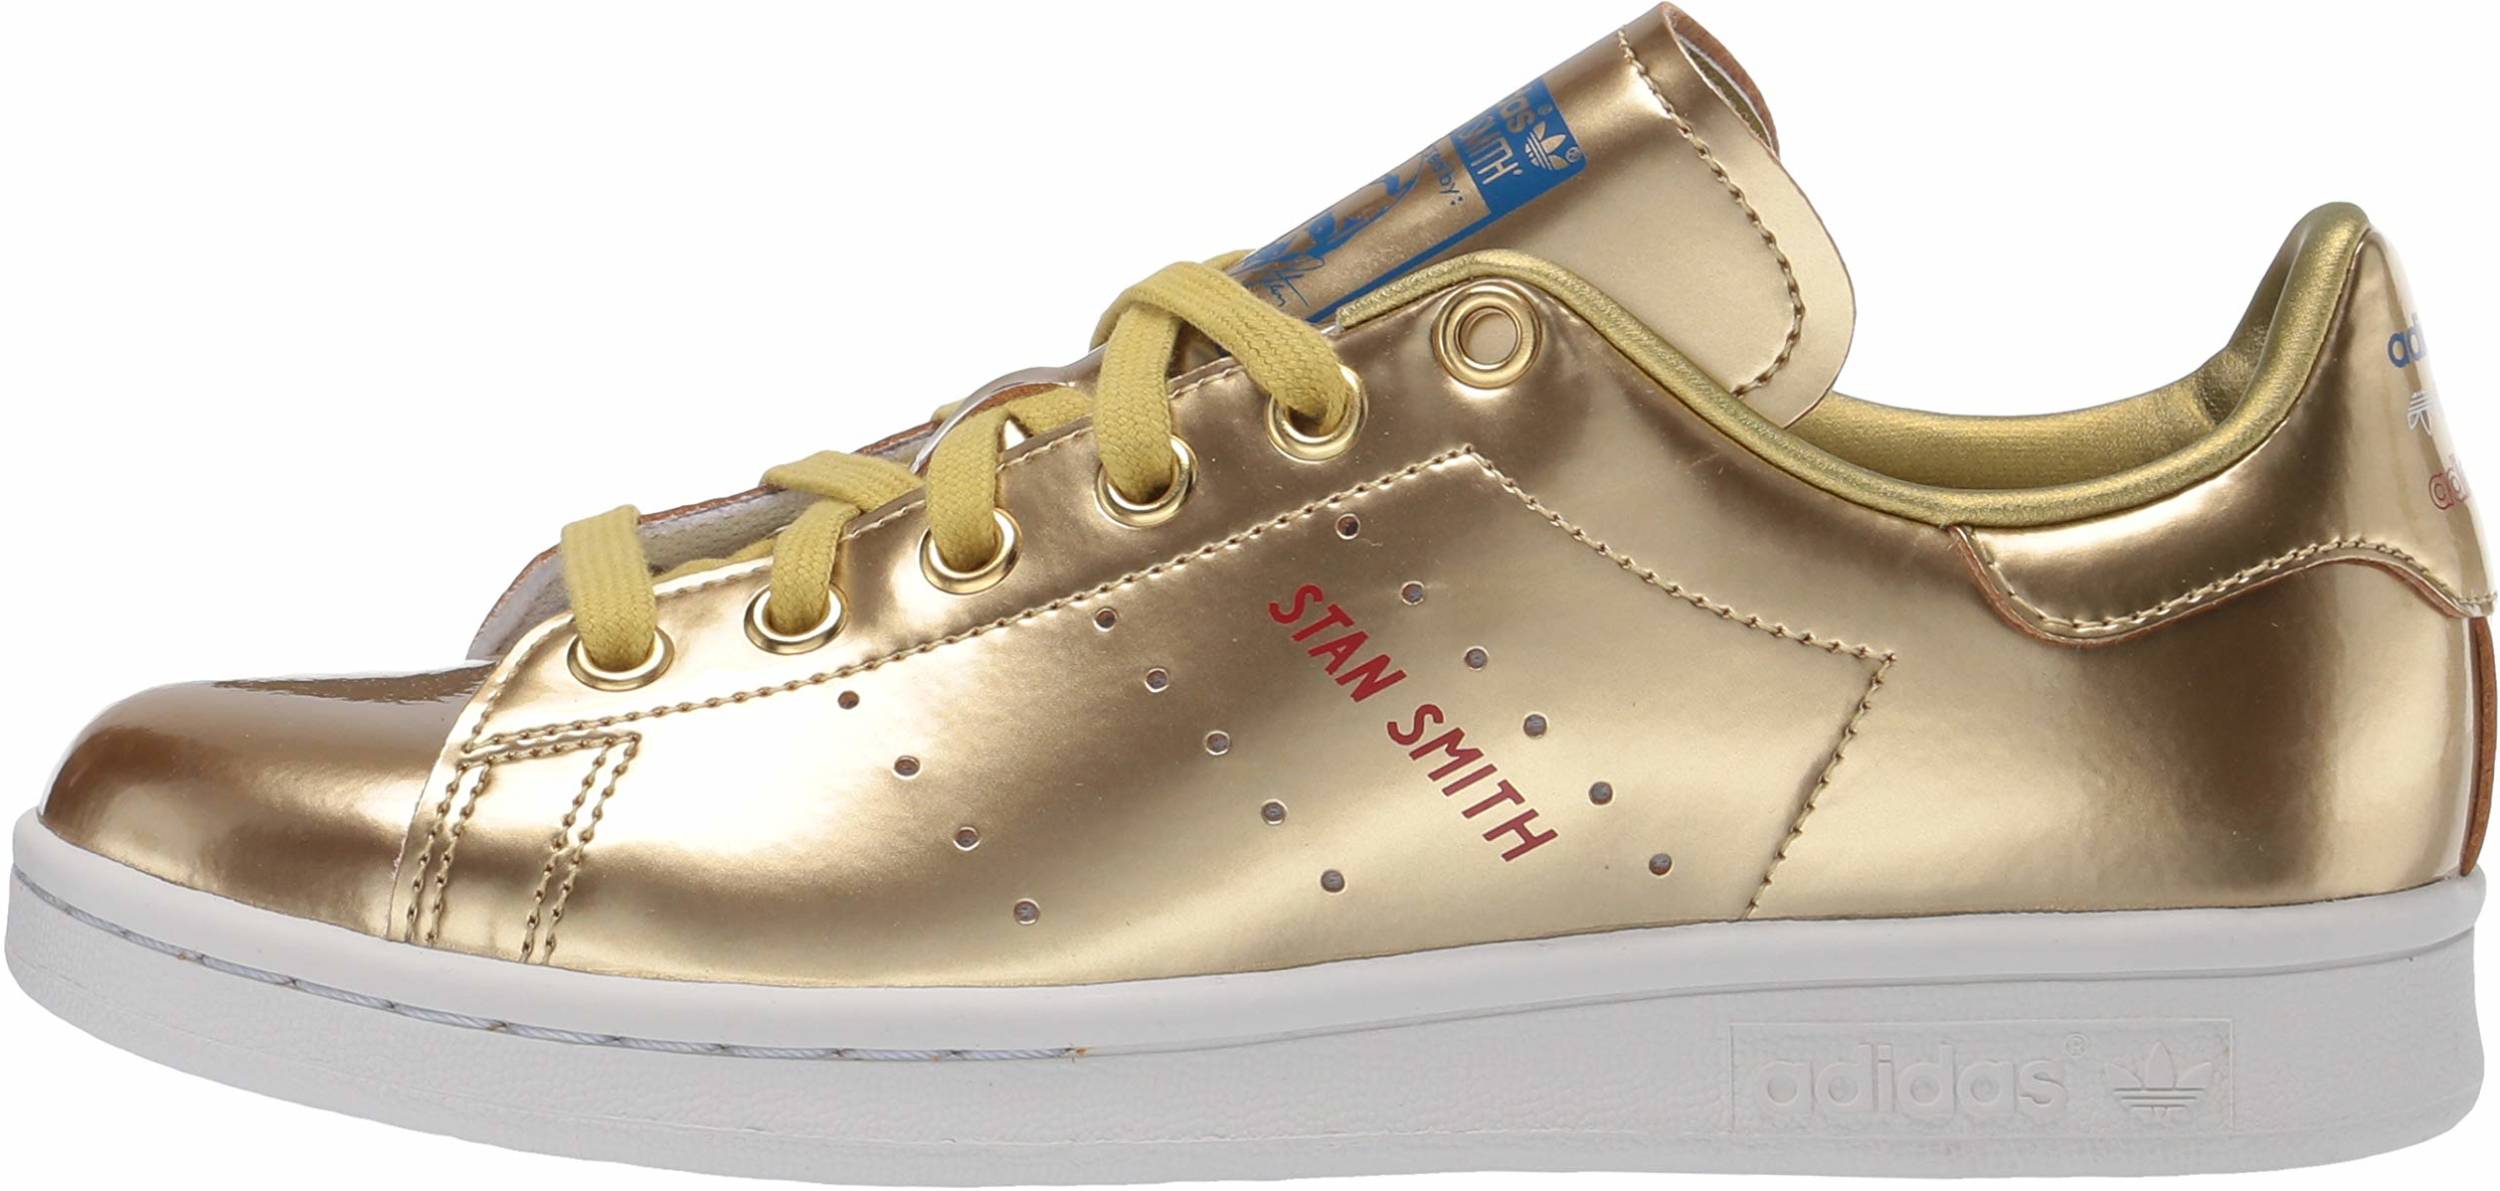 Save 28% on Gold Sneakers (42 Models in 